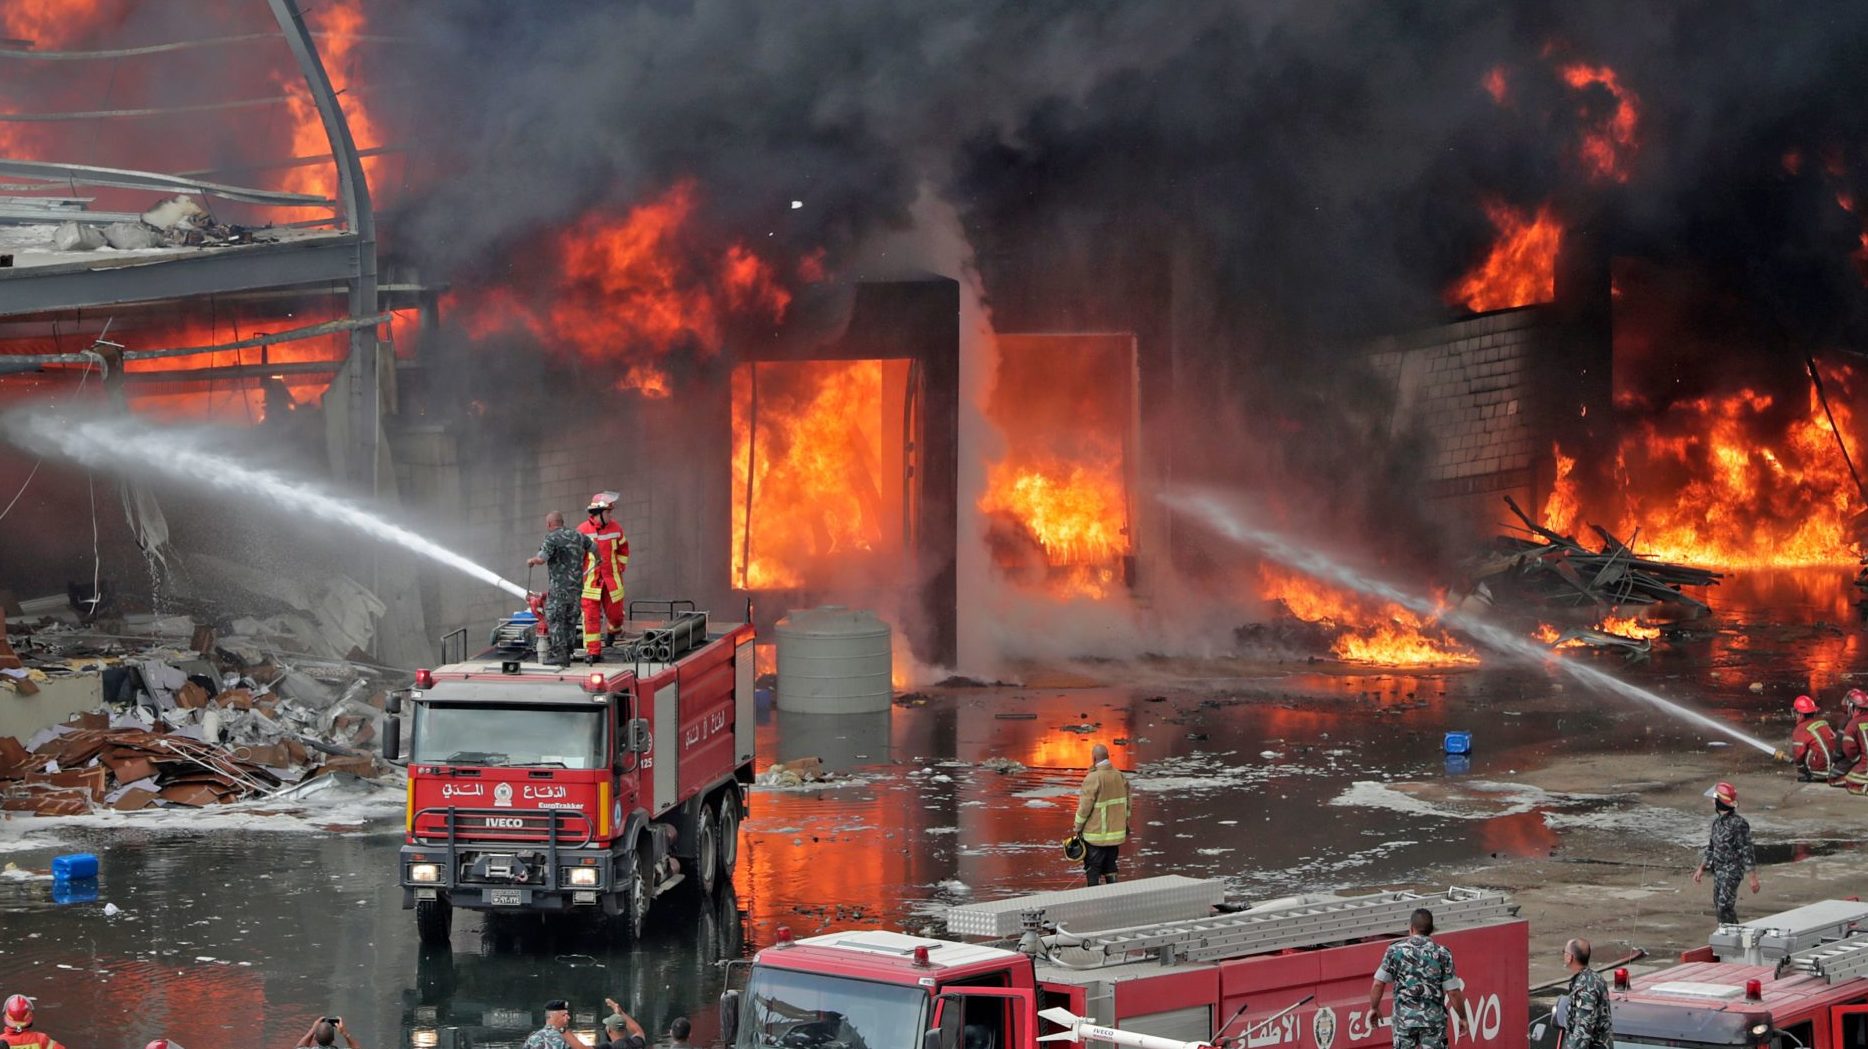 Fire at Beirut Port Stretches Nerves of Local Residents